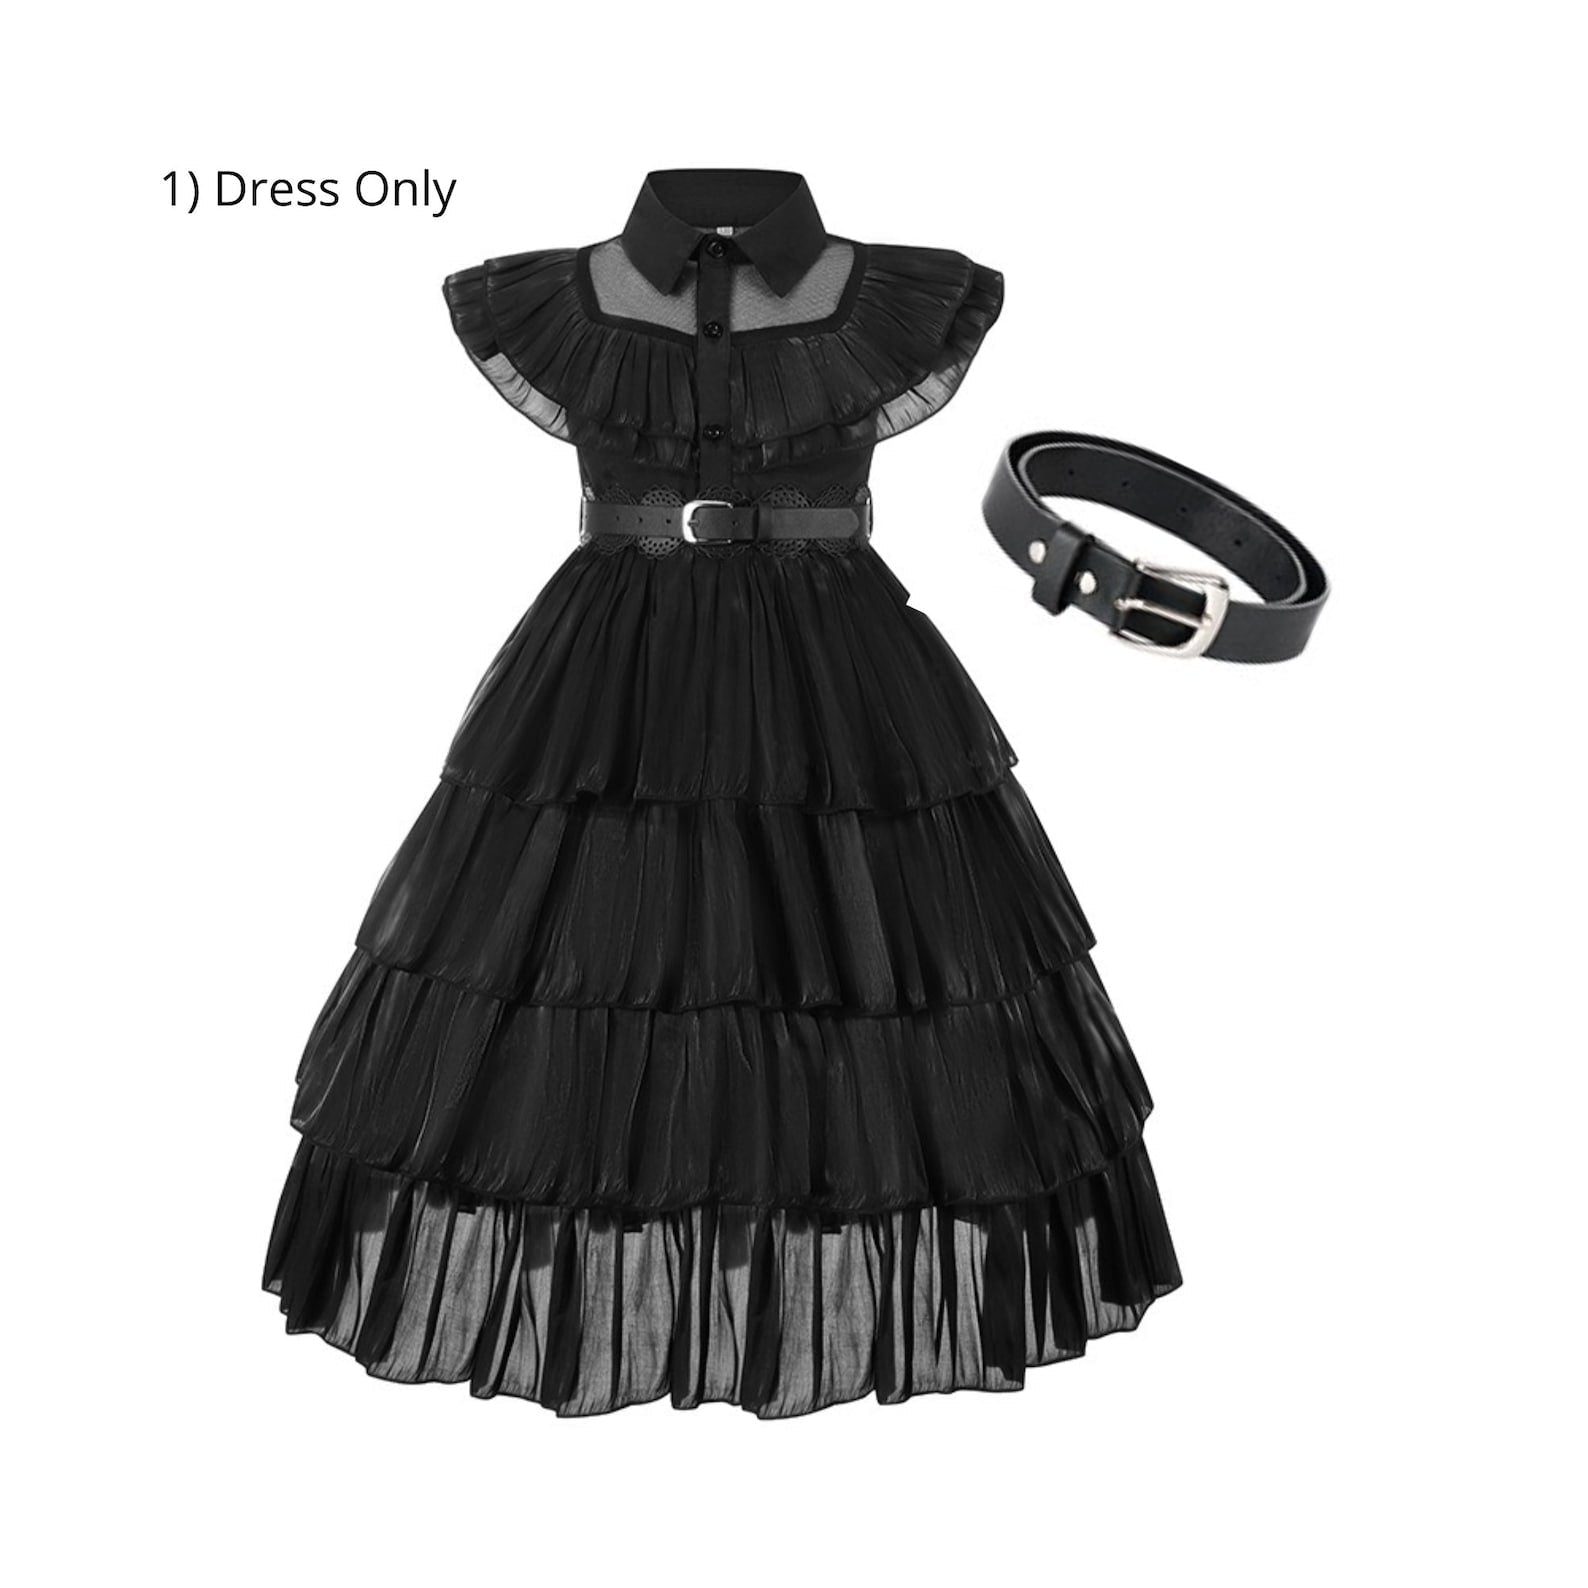 Disney-Inspired Wednesday Addams Dress, party costume, and Halloween Outfit Dress Only